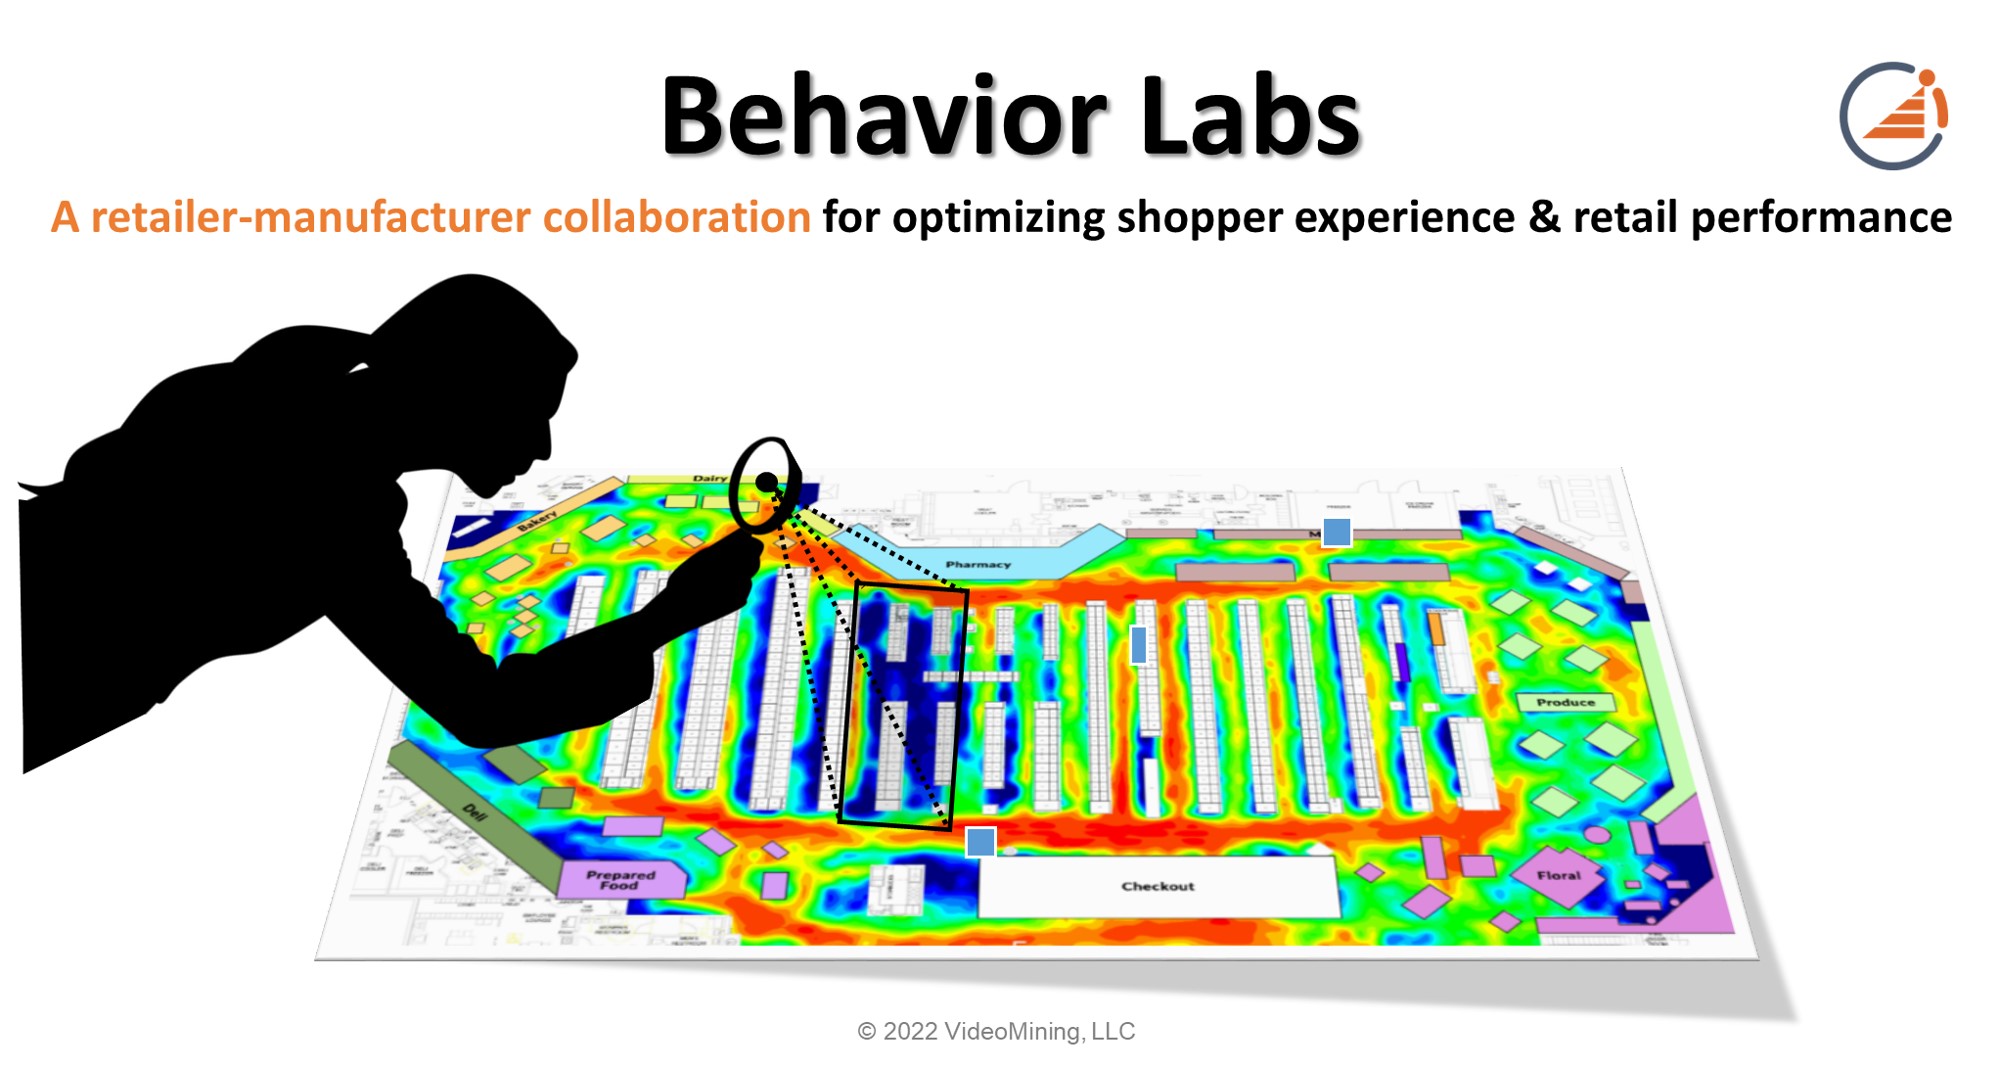 Behavior Labs by VideoMining for optimizing shopper experience and retail performance